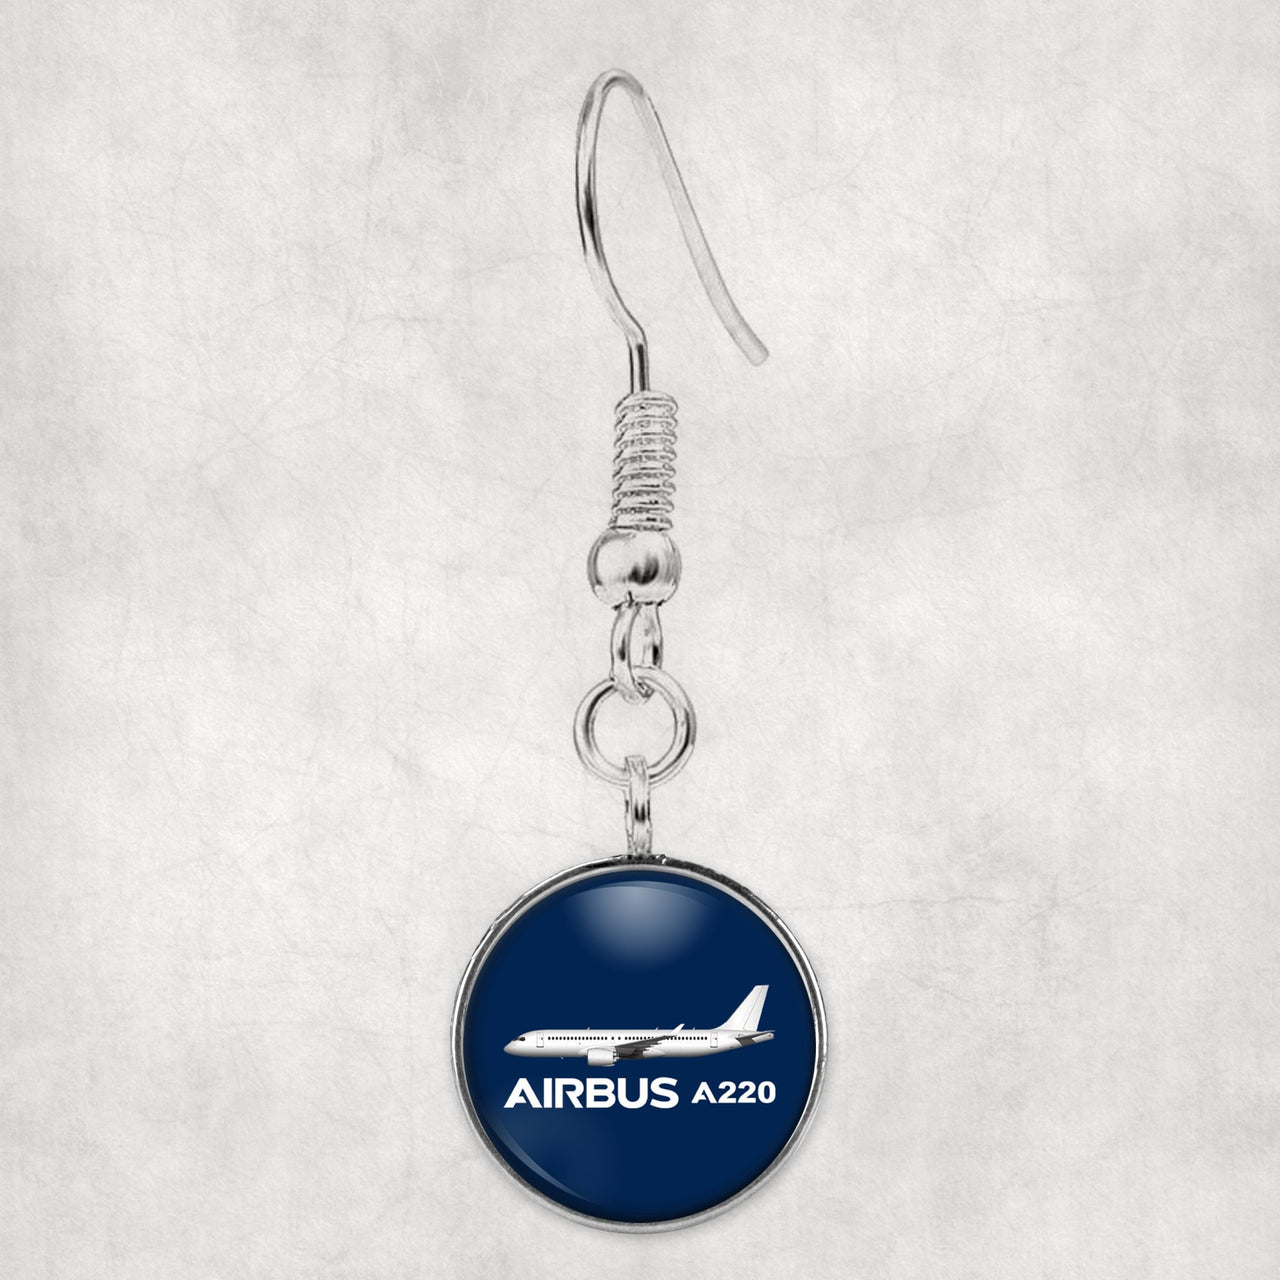 The Airbus A220 Designed Earrings